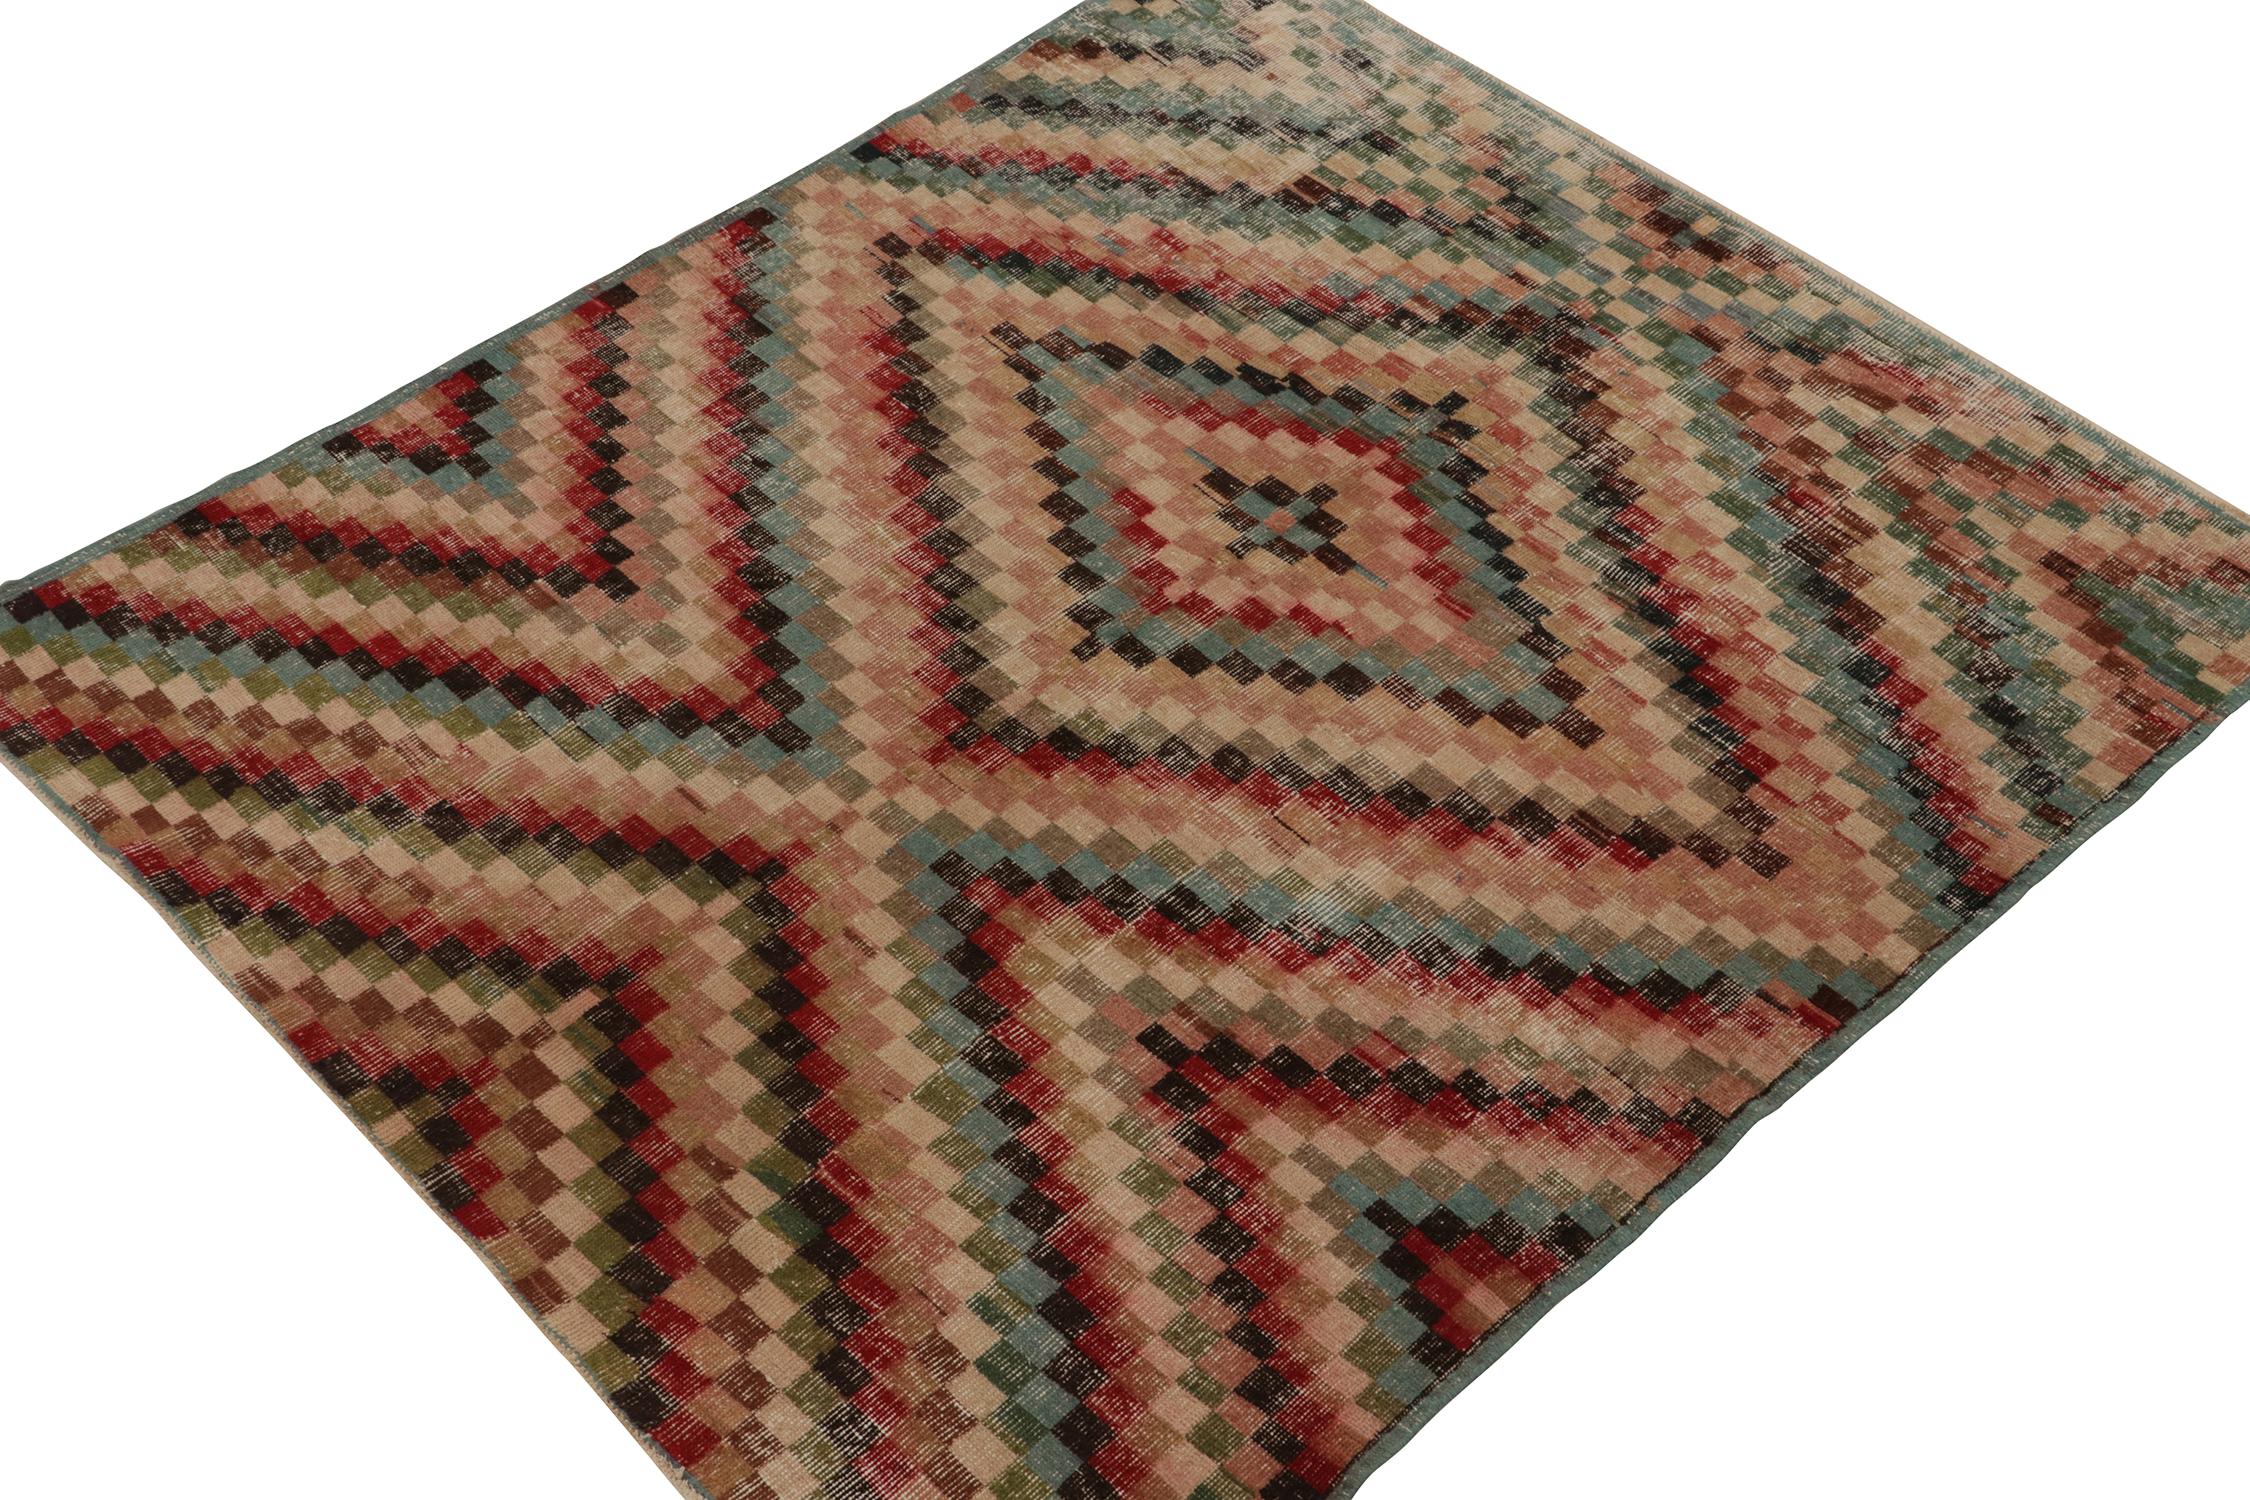 This vintage 6 x 6 rug is a new addition to Rug & Kilim’s commemorative Mid-Century Pasha Collection. This line is a commemoration of rare curations we believe to hail from mid-century Turkish designer Zeki Müren.
Further on the Design:
This